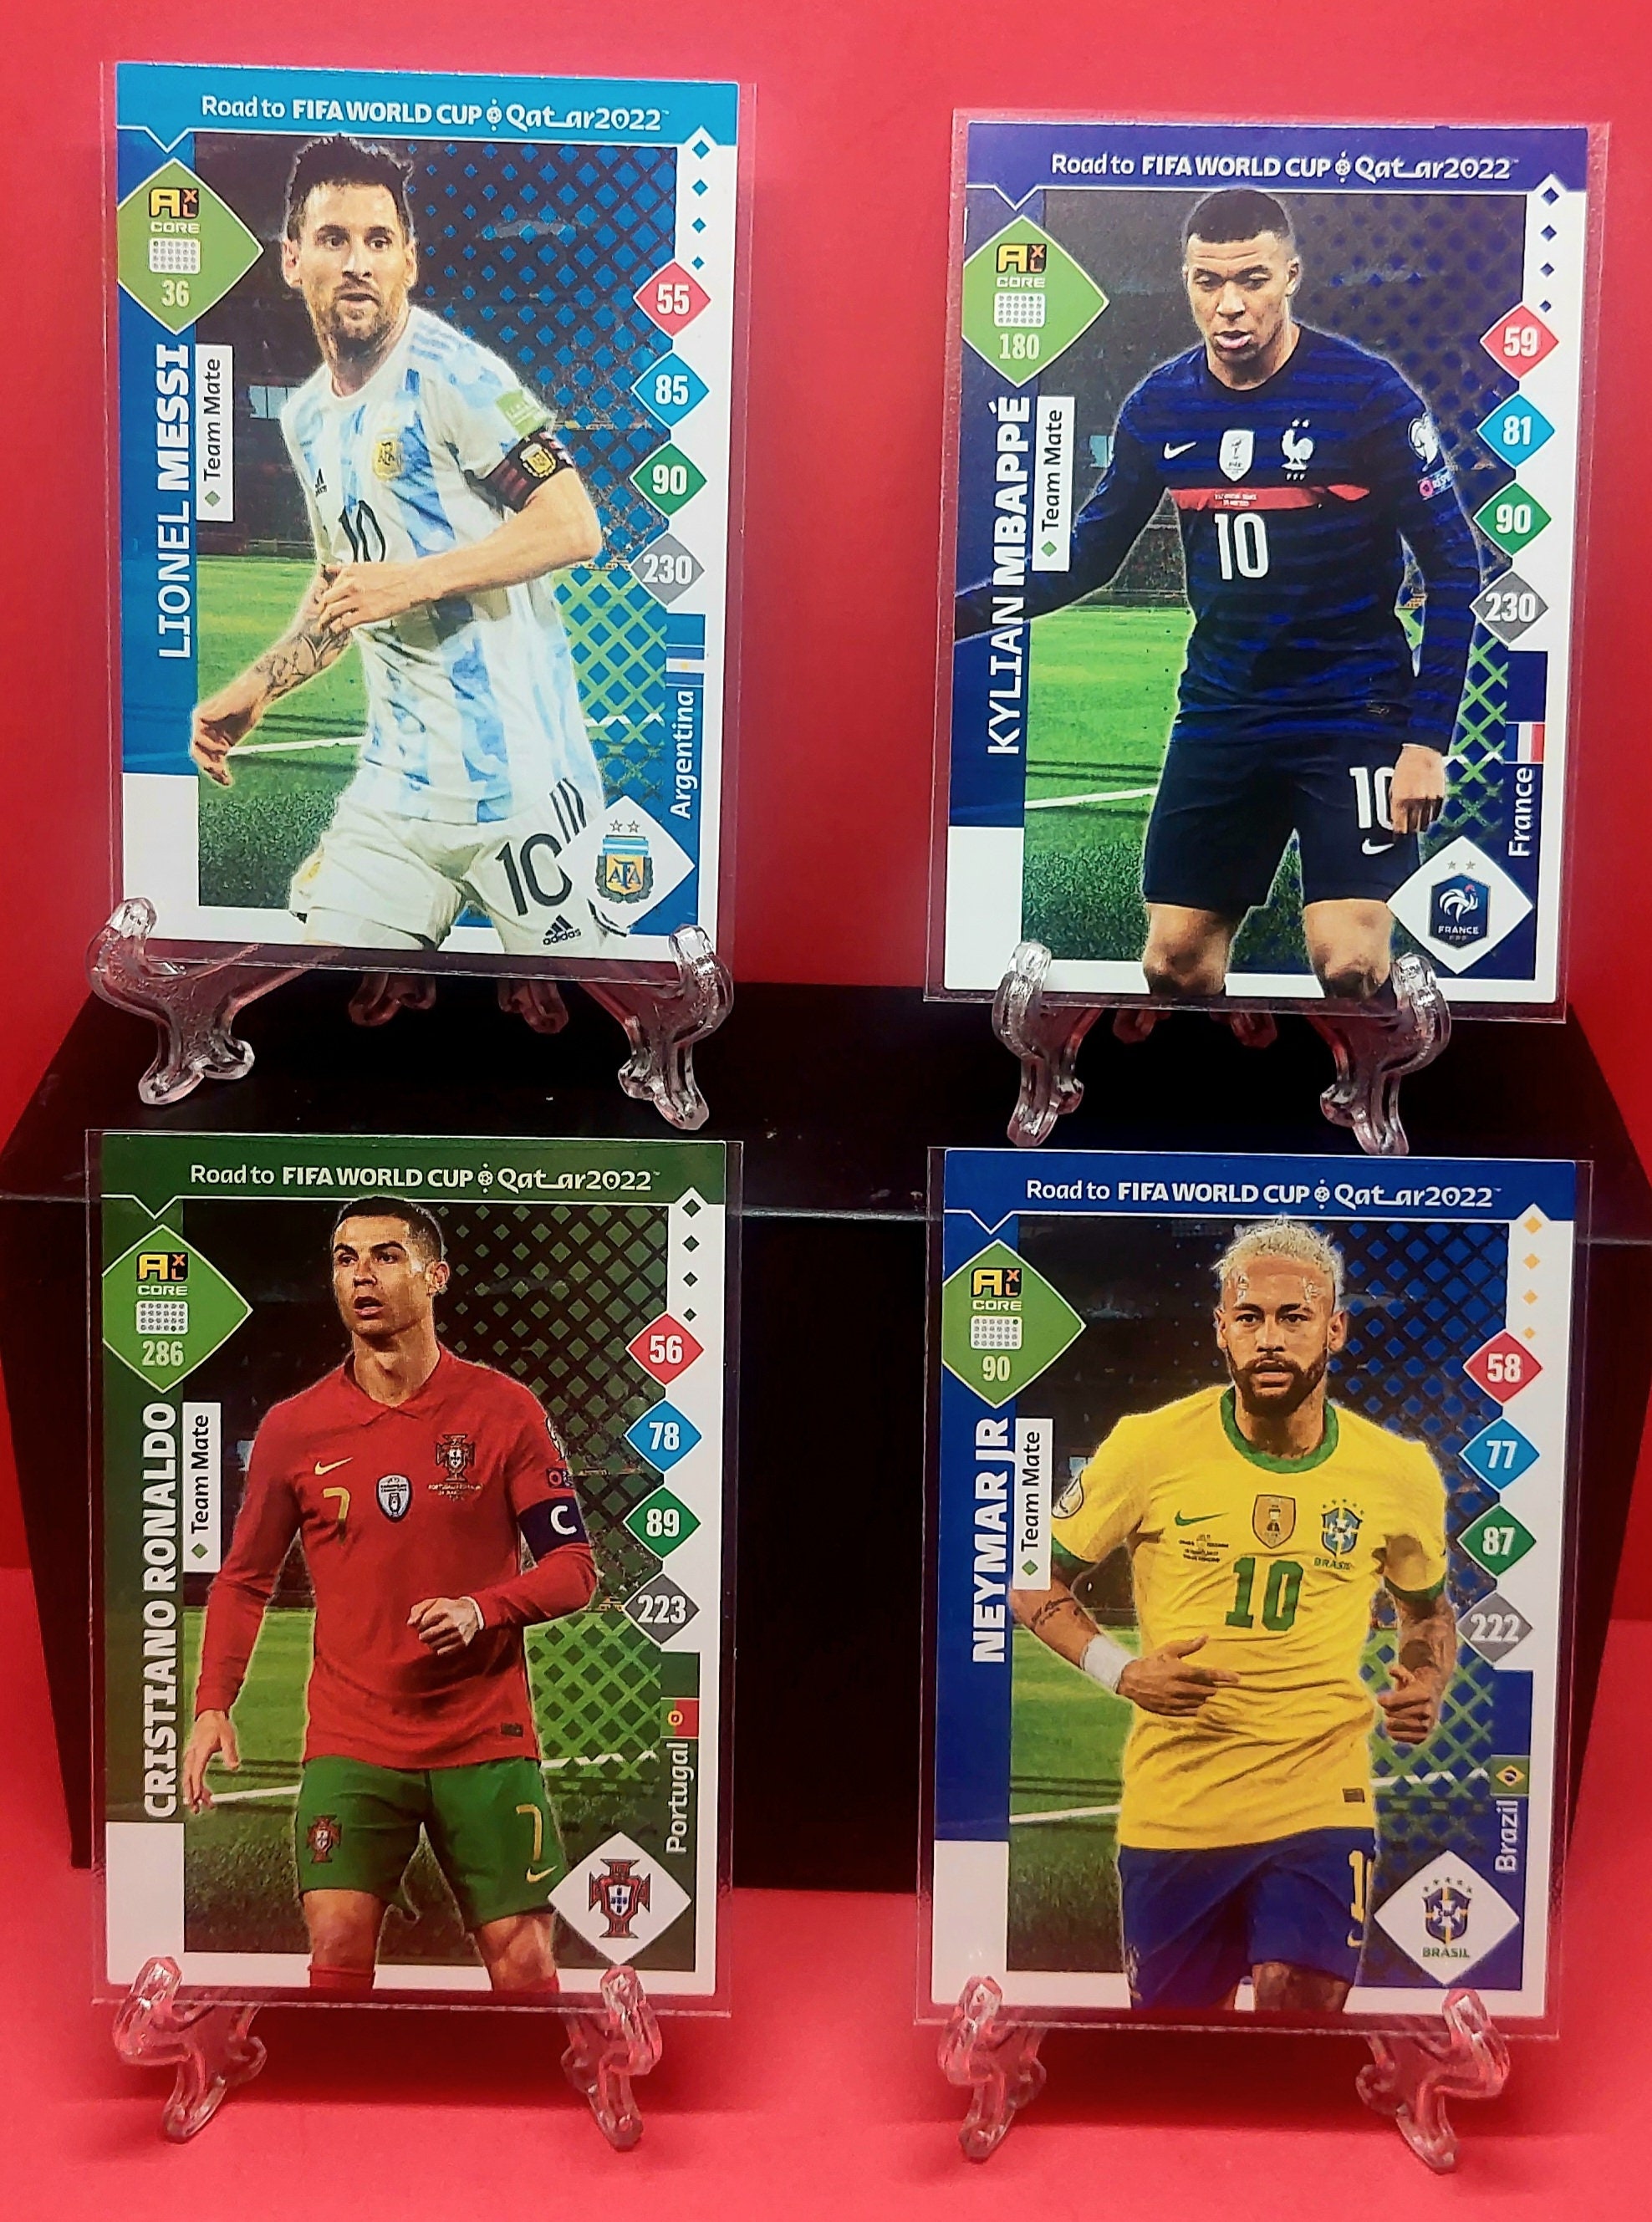 2018 Panini Adrenalyn XL Road to Russia Memphis Depay Netherlands Game  Changer Insert Card! Awesome Special Great Looking Card Imported from Europe!  Shipped in Ultra Pro Top Loader to Protect it! at